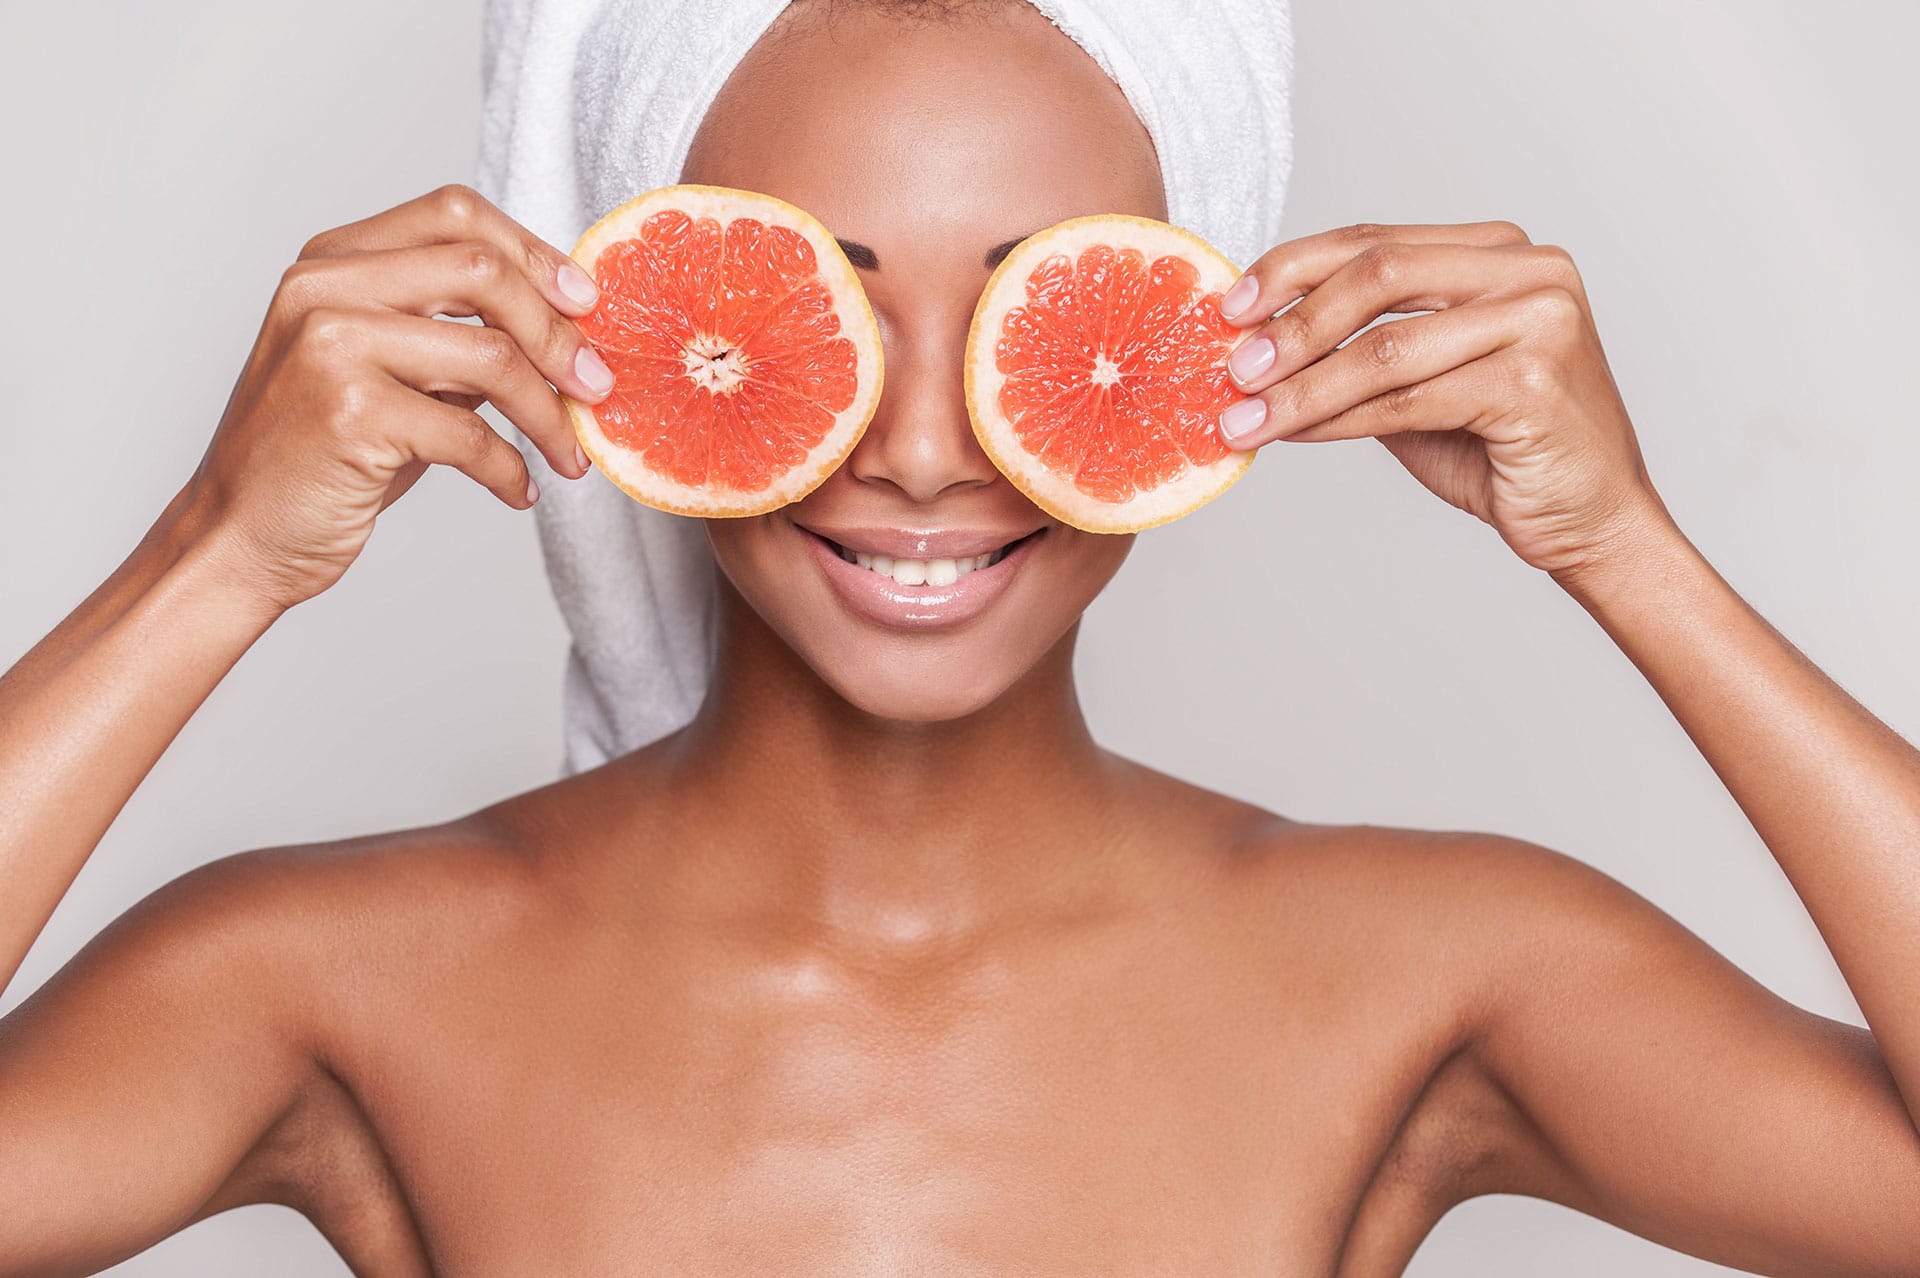 Woman holding grapefruit slices in front of her eyes